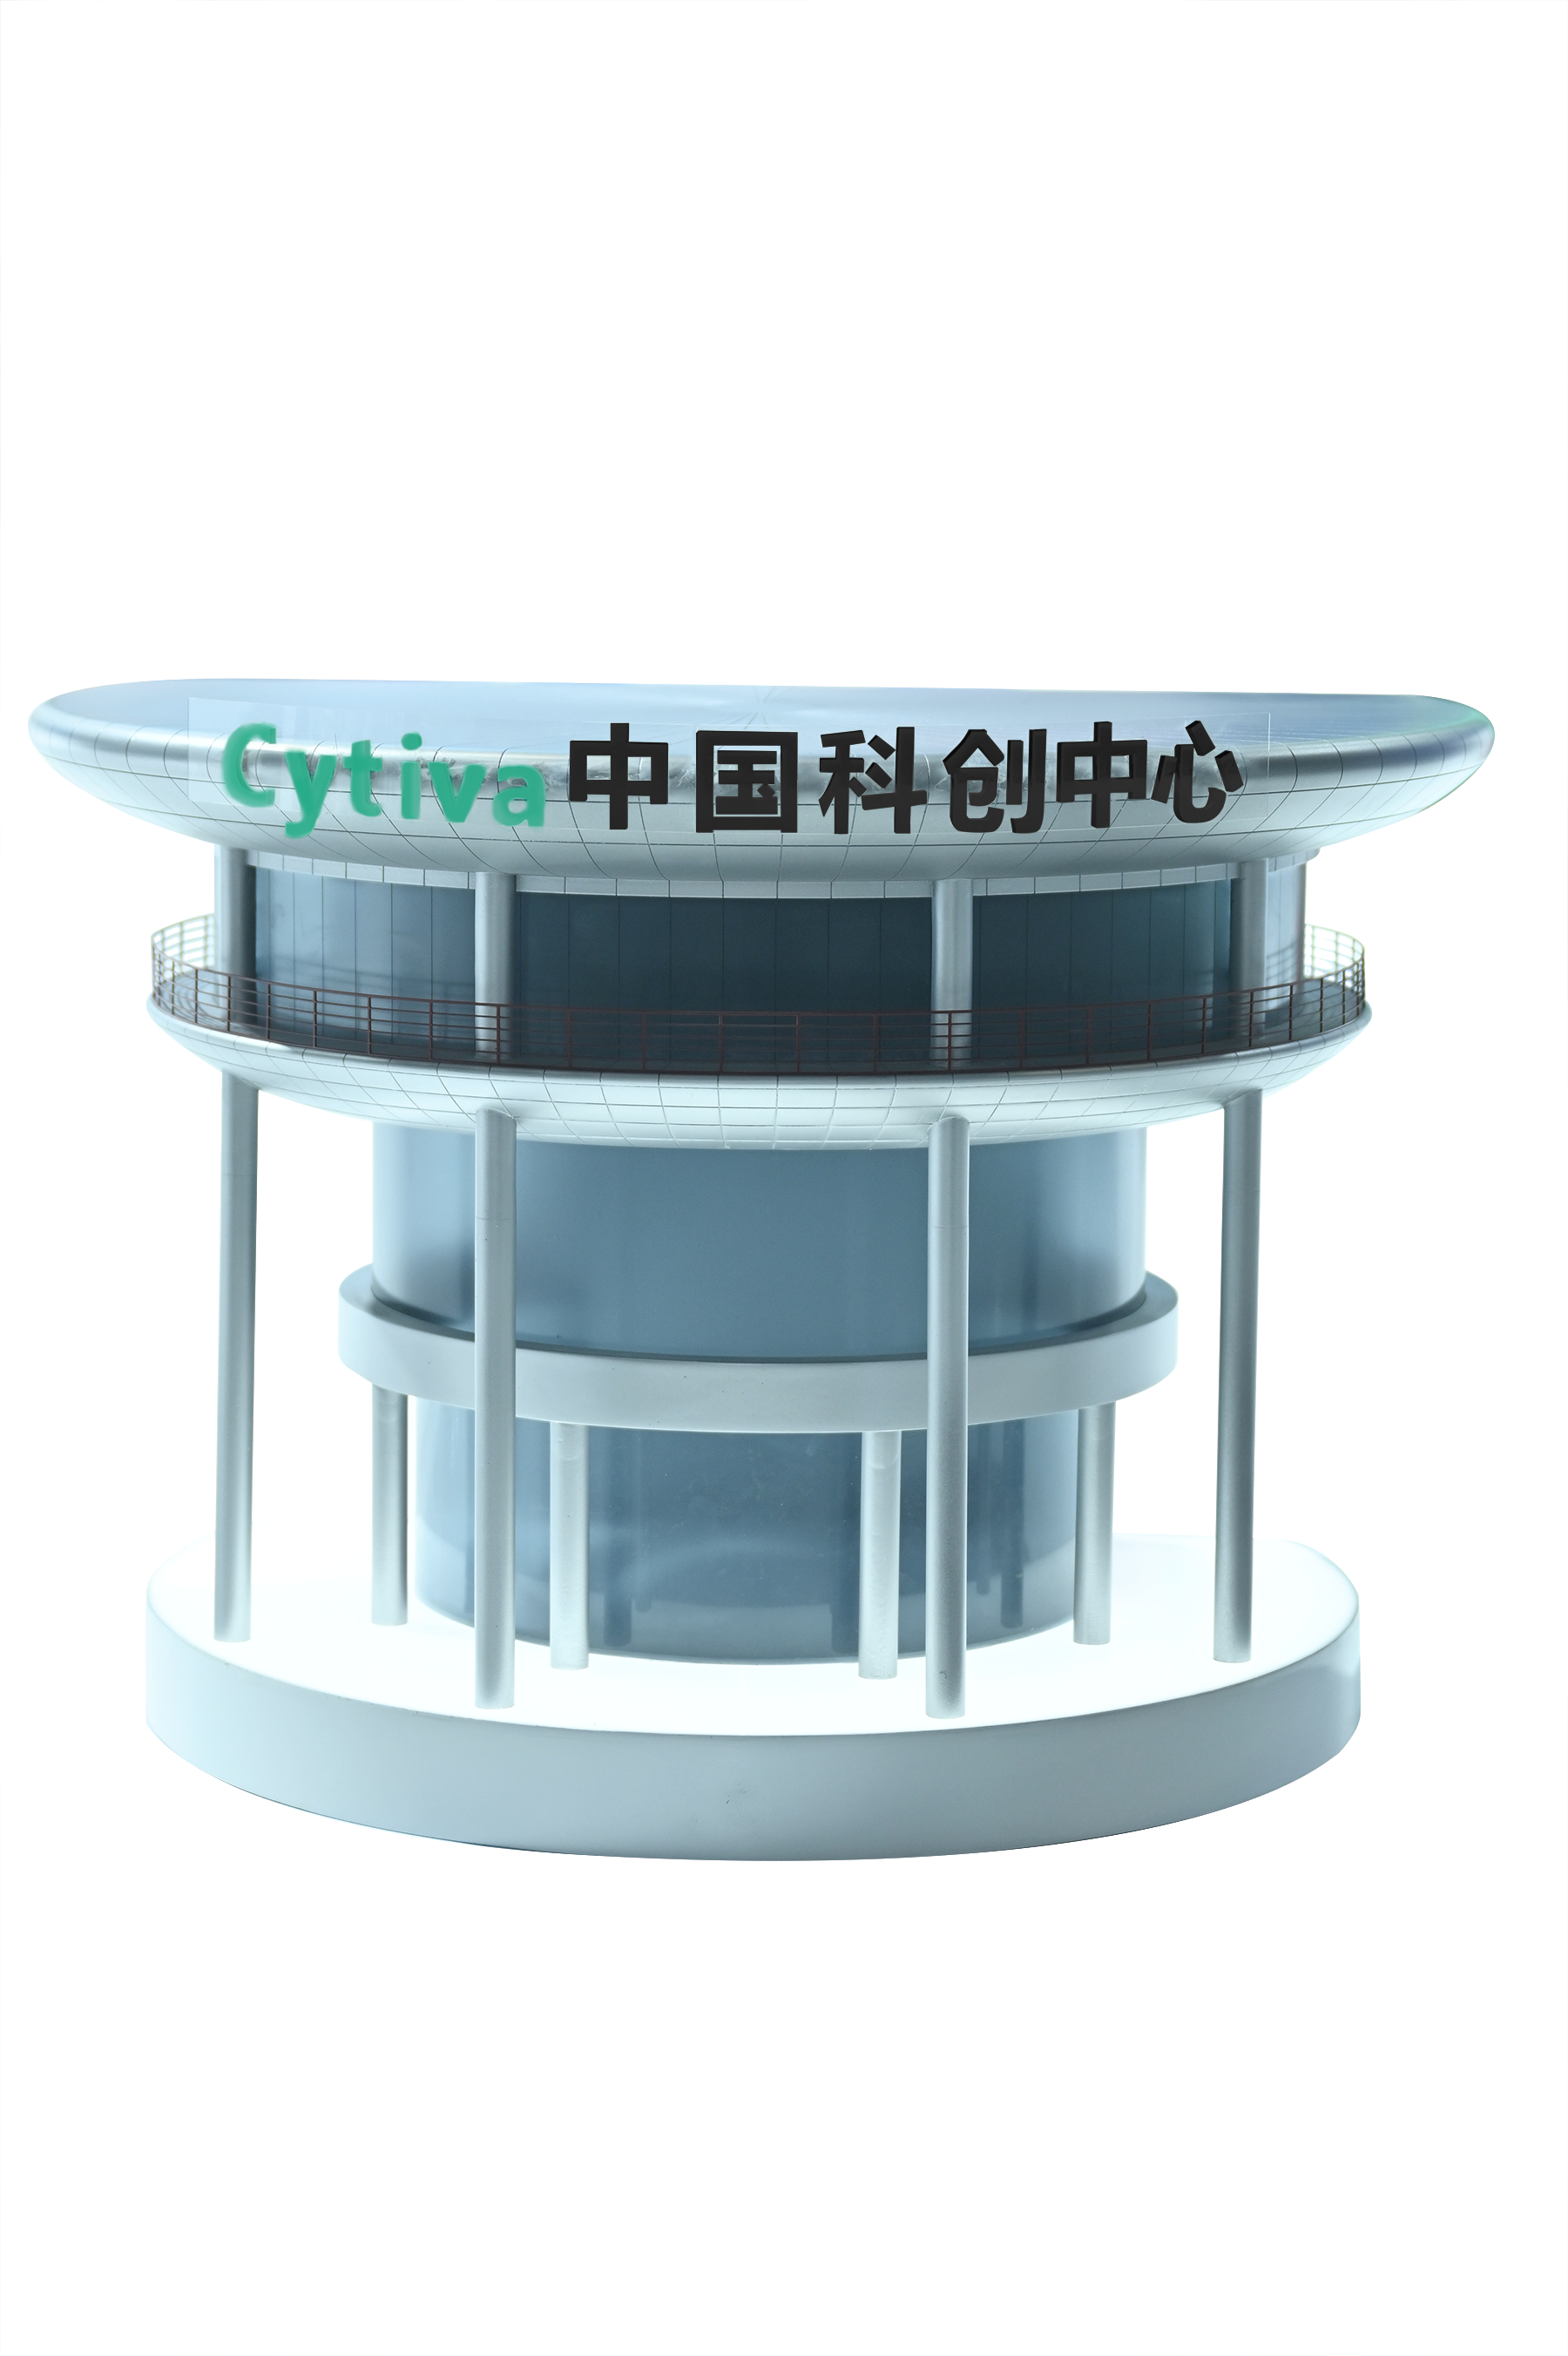 Cytiva China expands Fast Trak center to better serve the regional market.